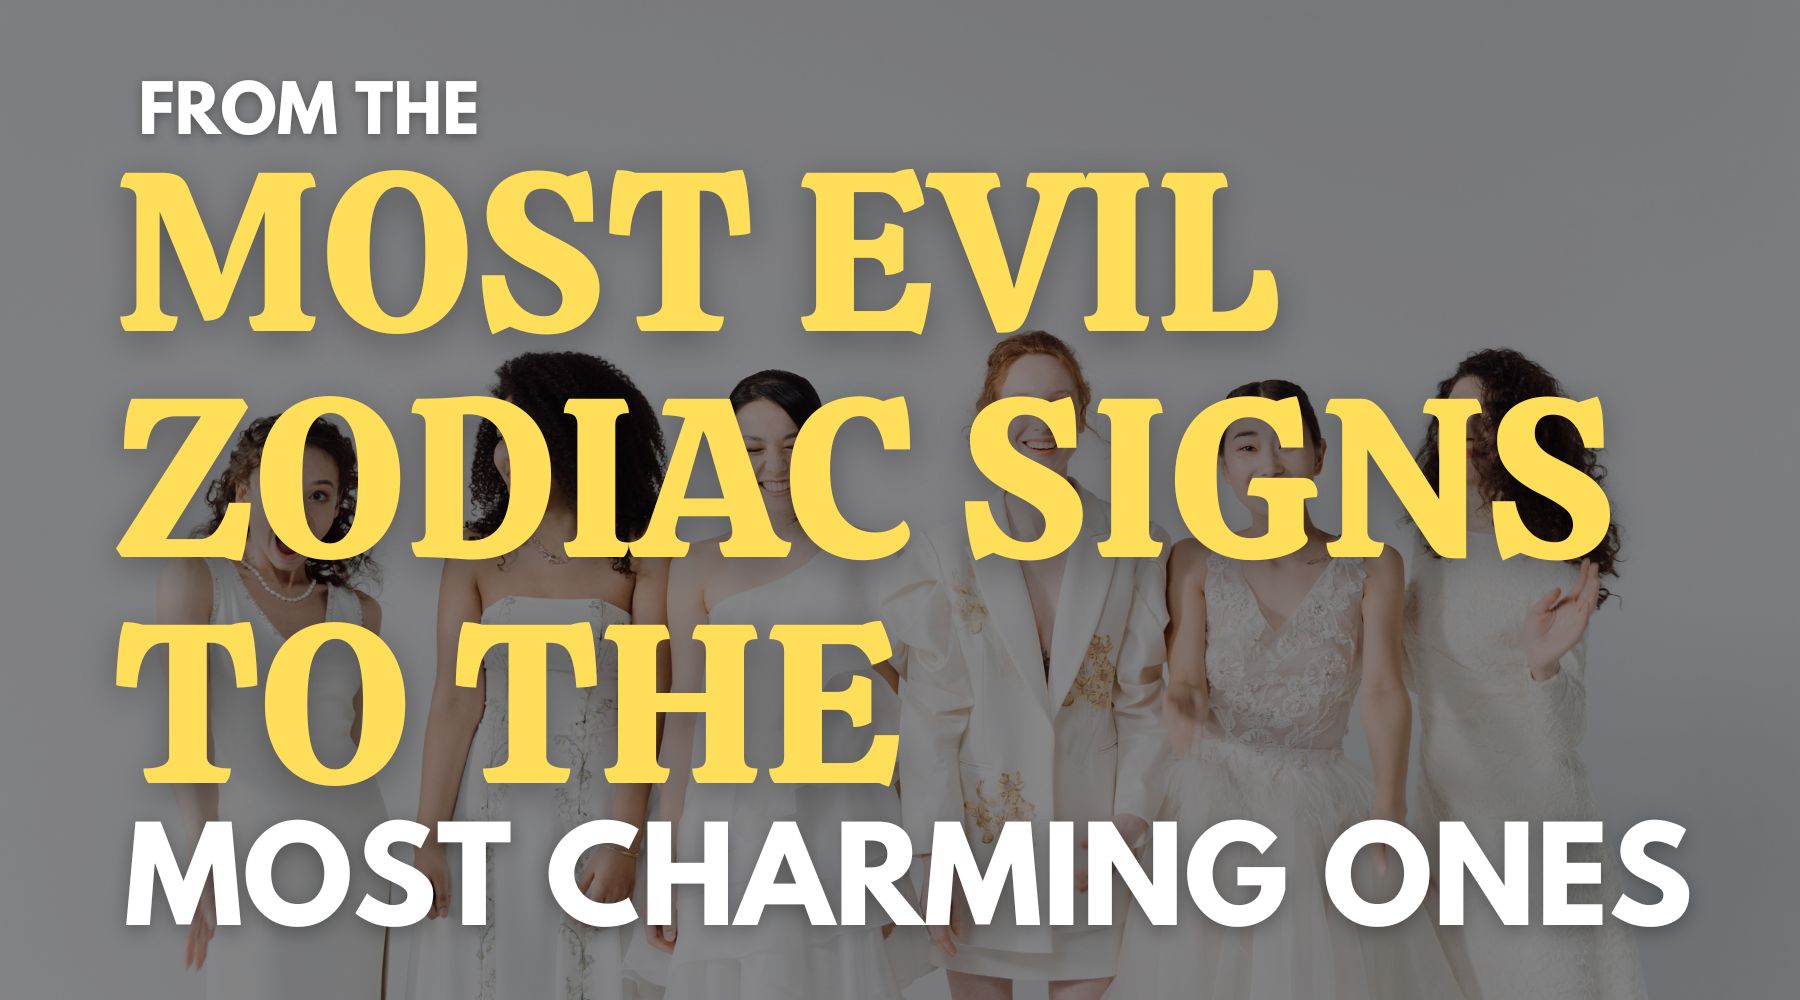 From the most evil zodiac sign to the most charming ones-A list to explore